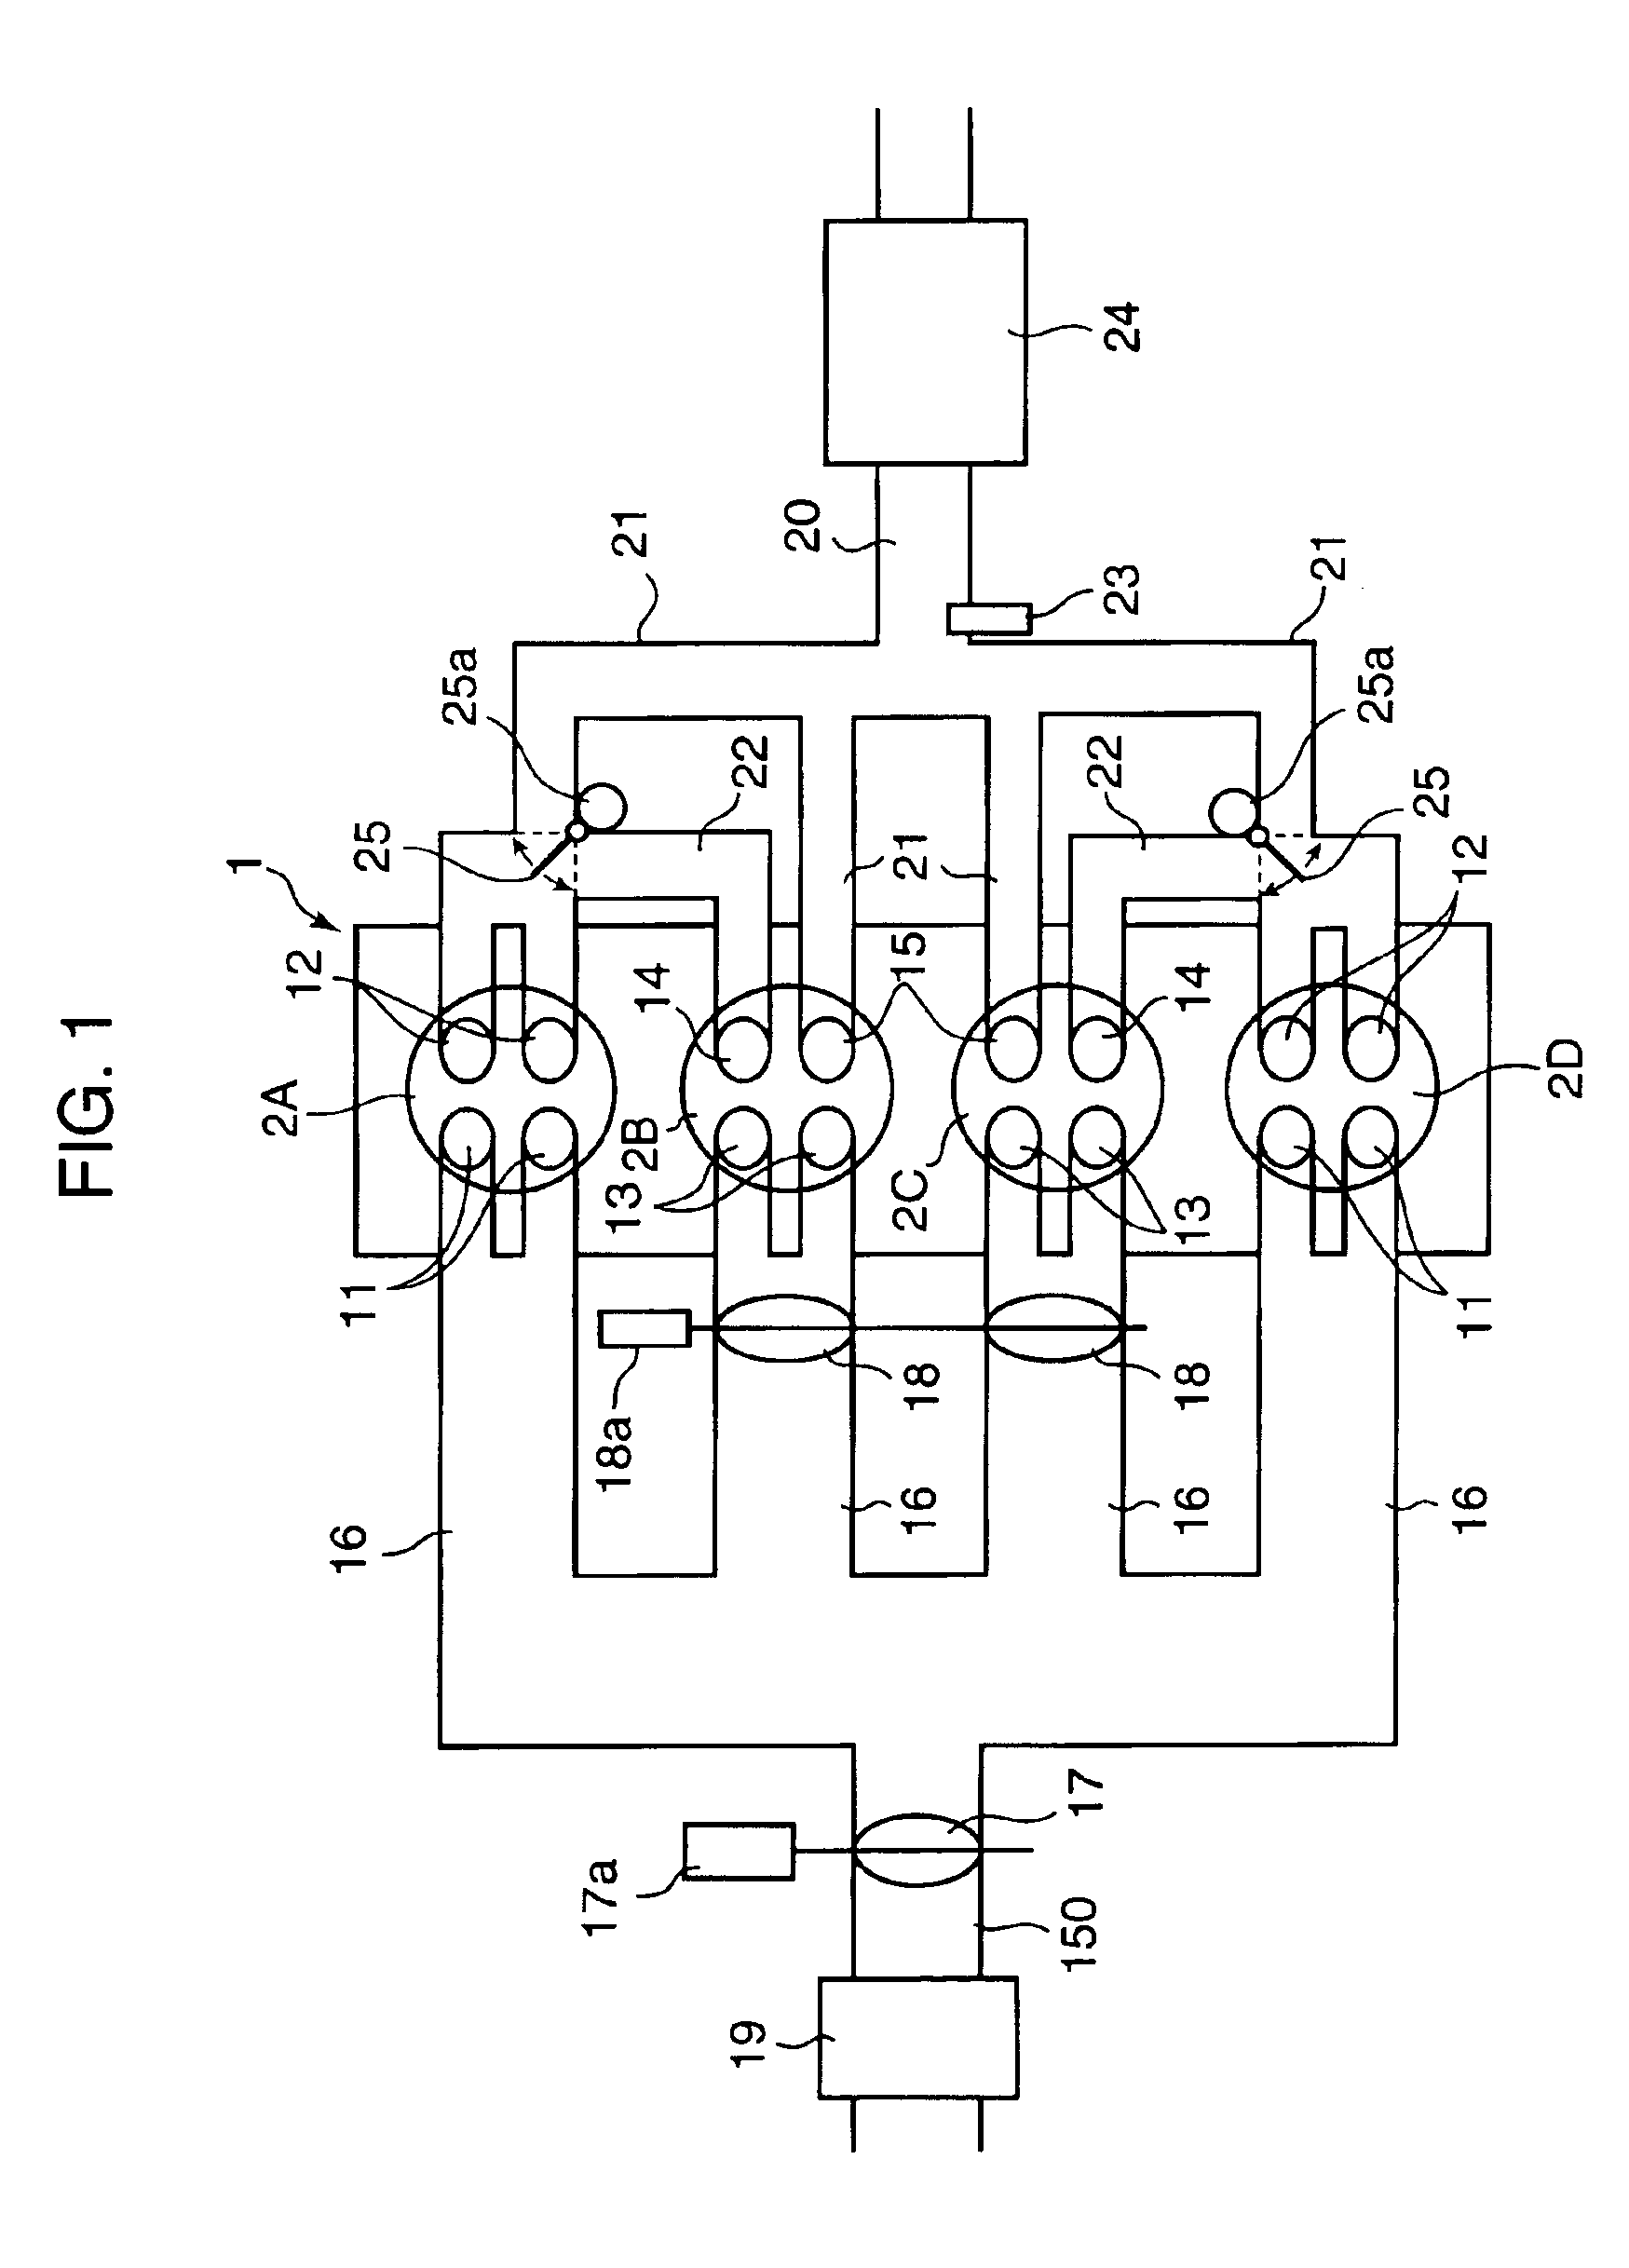 Control unit for spark ignition-type engine